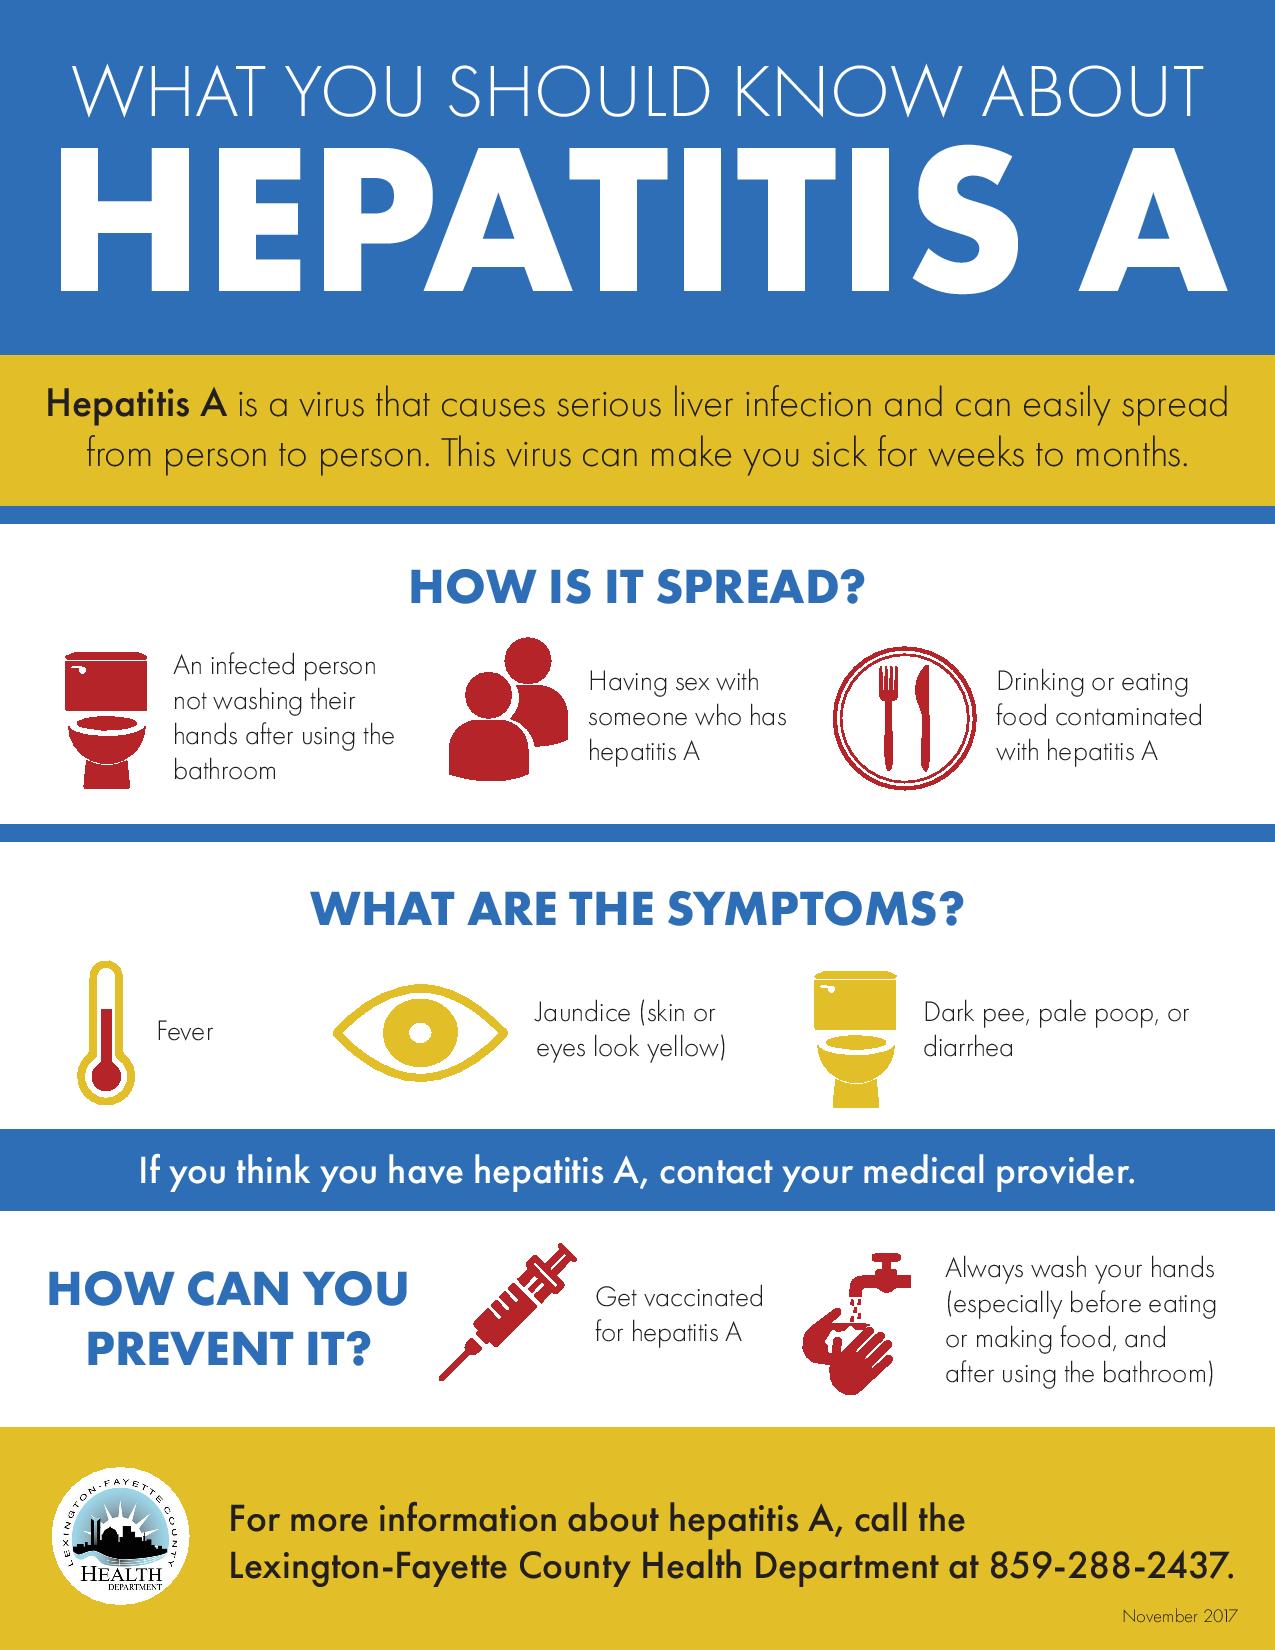 Hepatitis A Get Vaccination Wash Your Hands For Prevention Lexington Fayette County Health Department